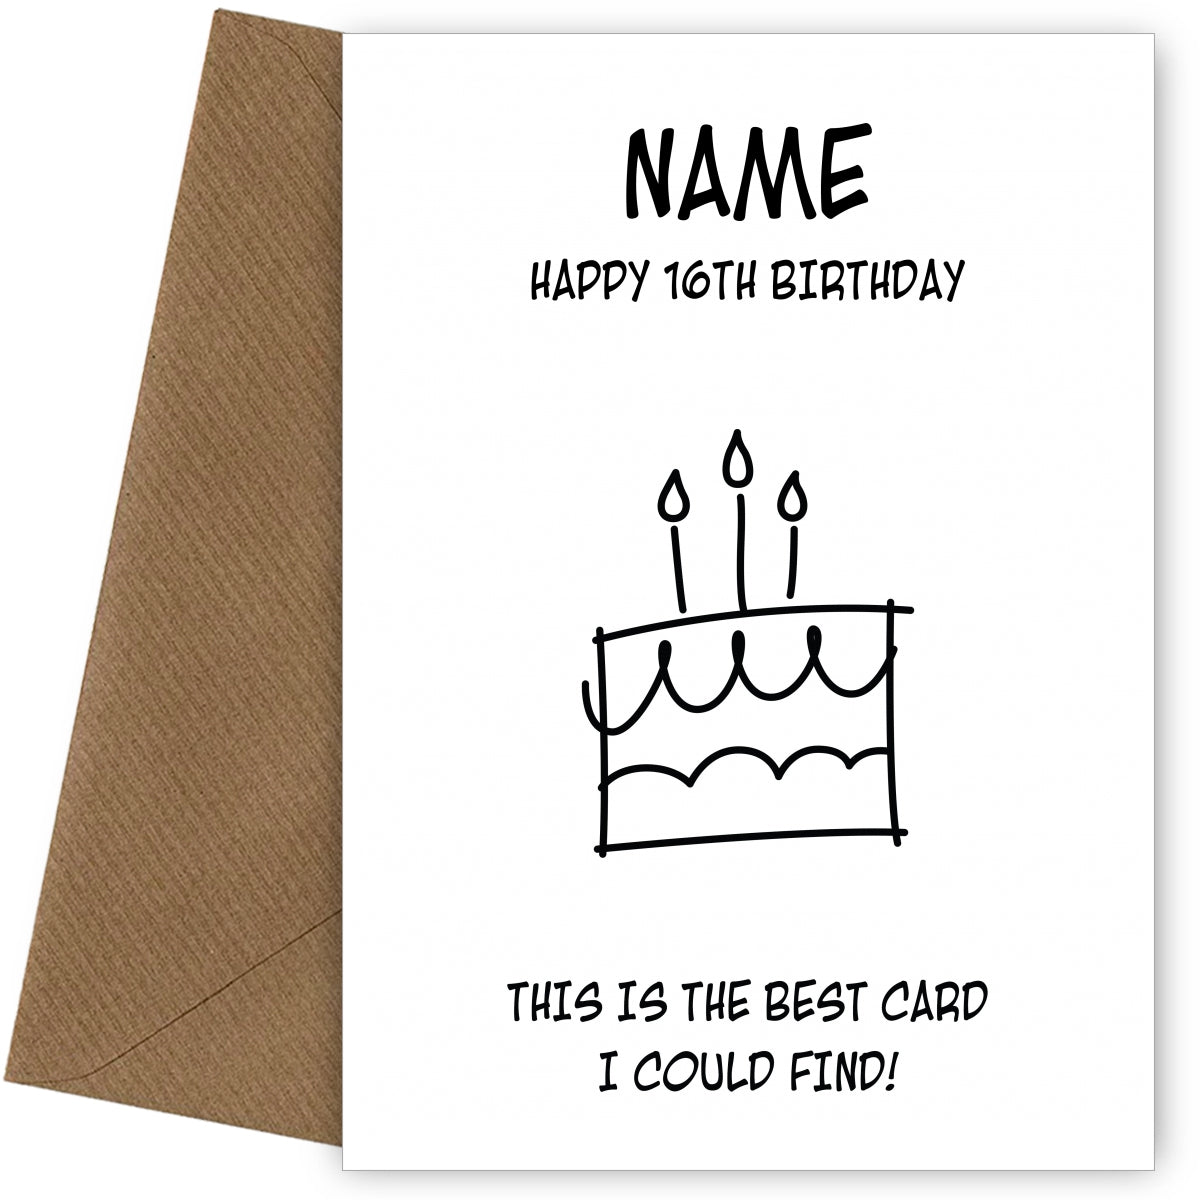 Happy 16th Birthday Card - Best Card I Could Find!